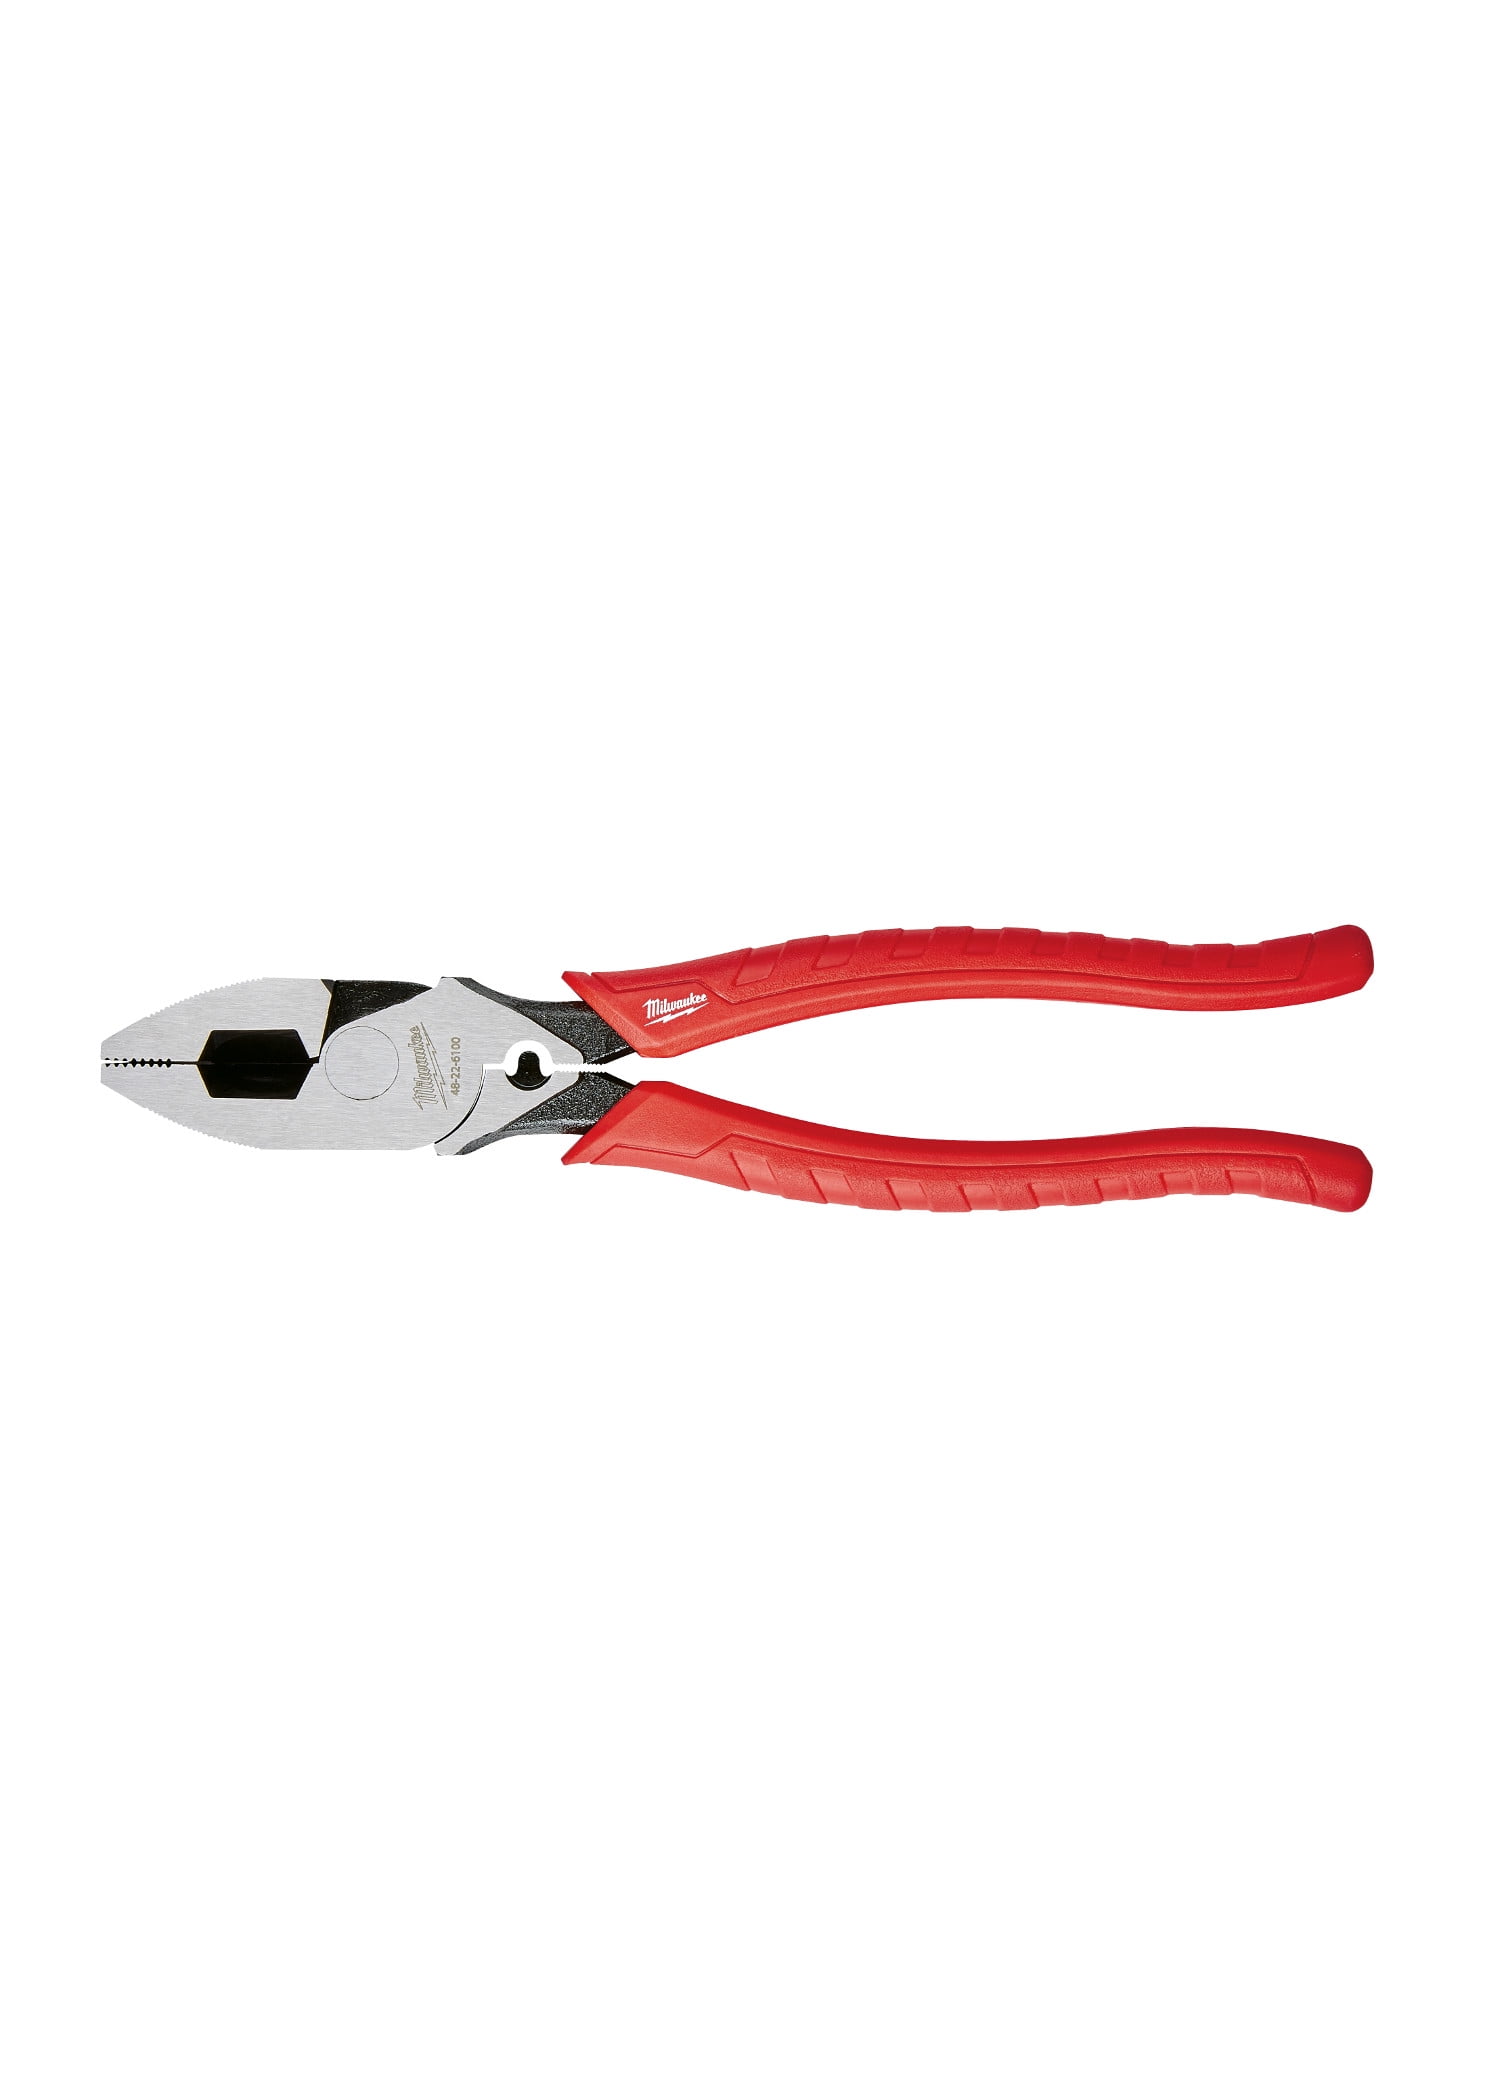 ELECTRICAL CRIMPING PLIERS 9.5" INCH WIRE CUTTERSHIGH LEVERAGE CRIMPAUDIO 